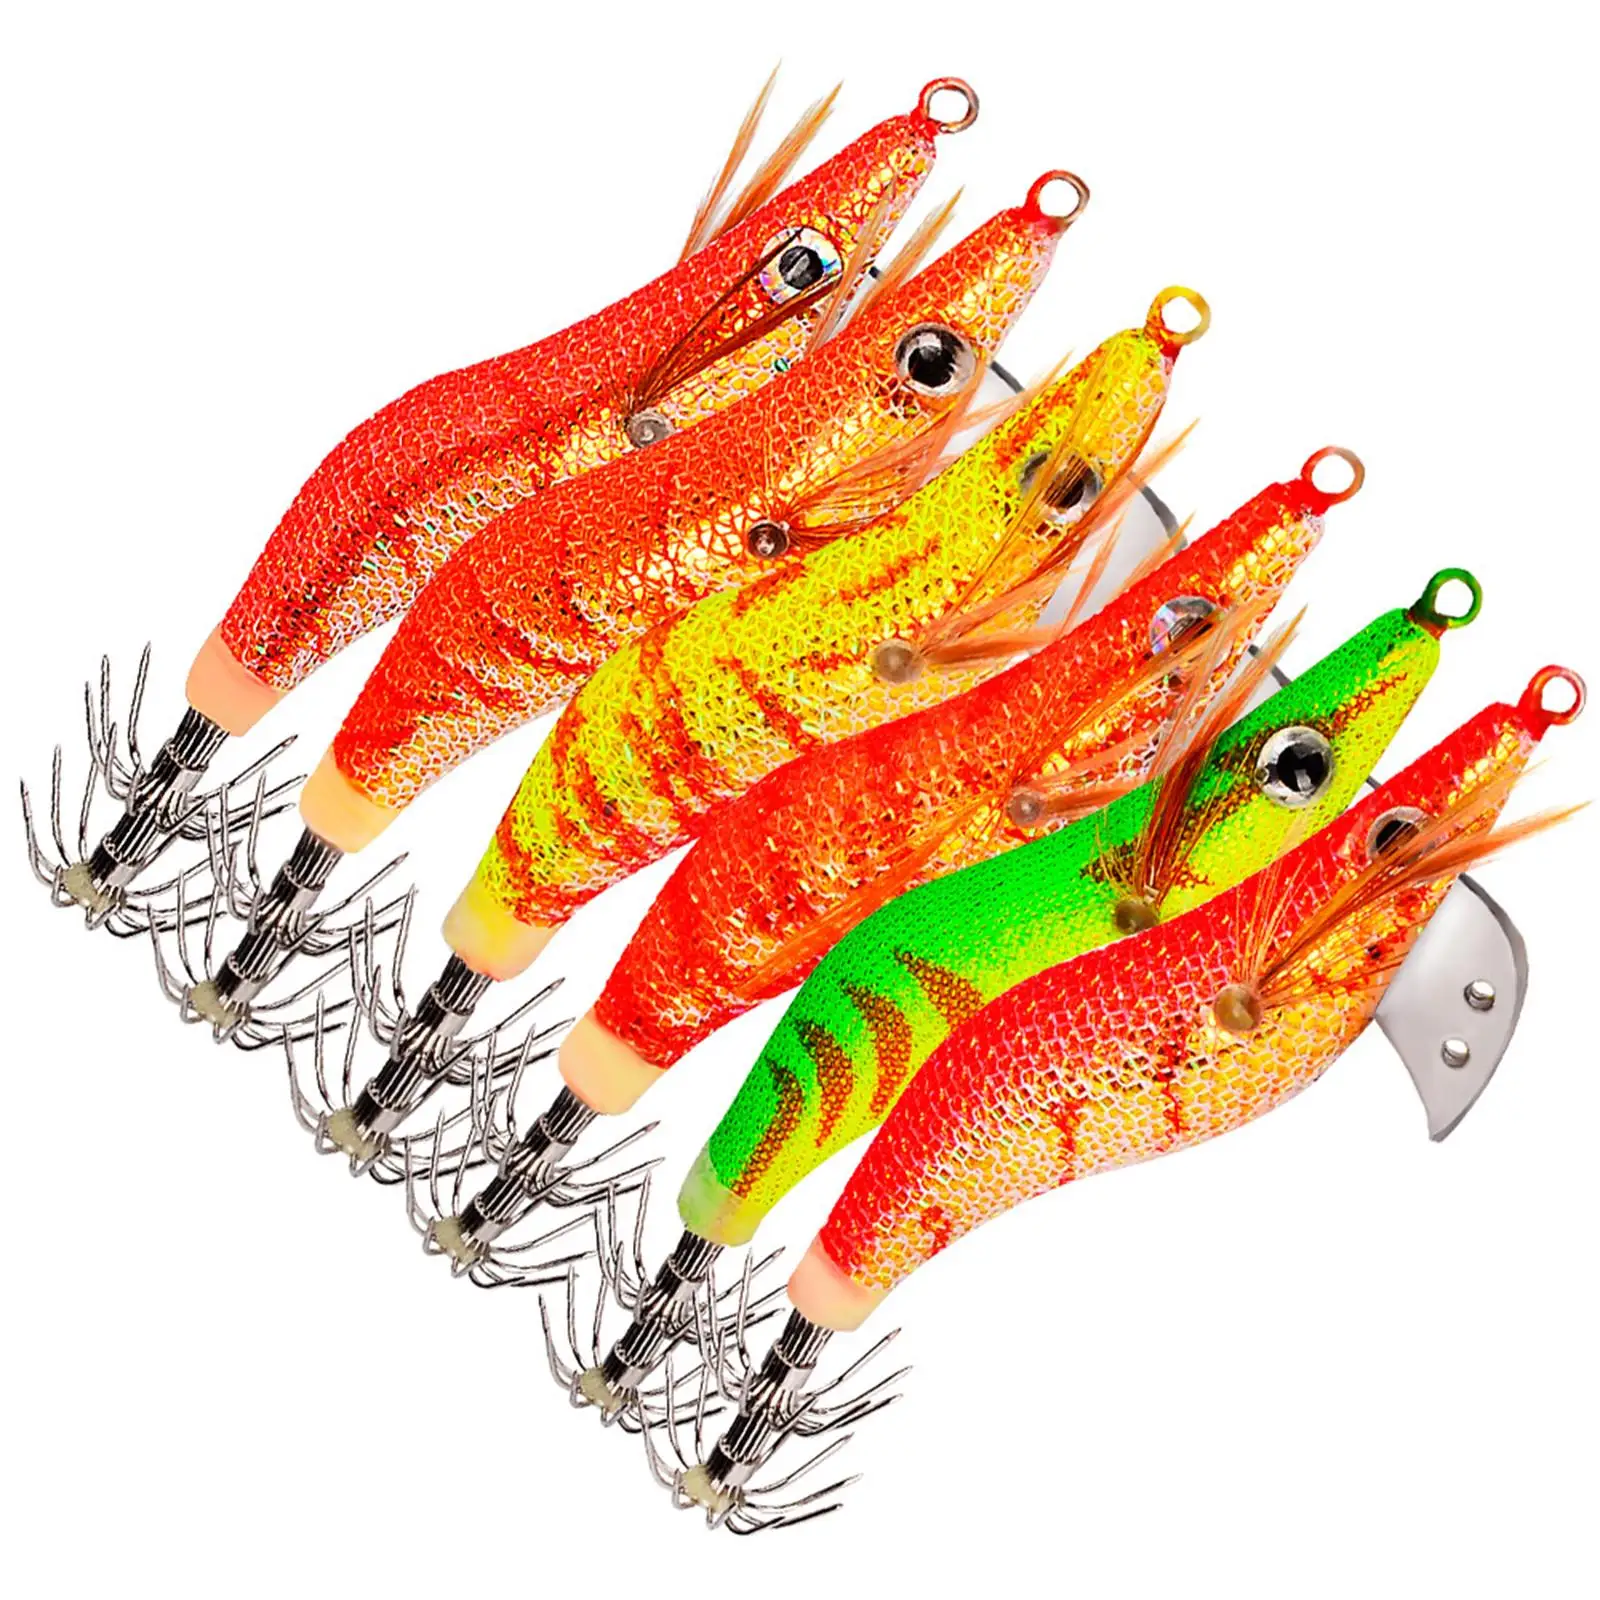 6x Squid Jig Hook Hard Fishing Lures 3D Eyes Fishing Gear Artificial Squid Cuttlefish Sleeve Lure Fish Hook for Octopus